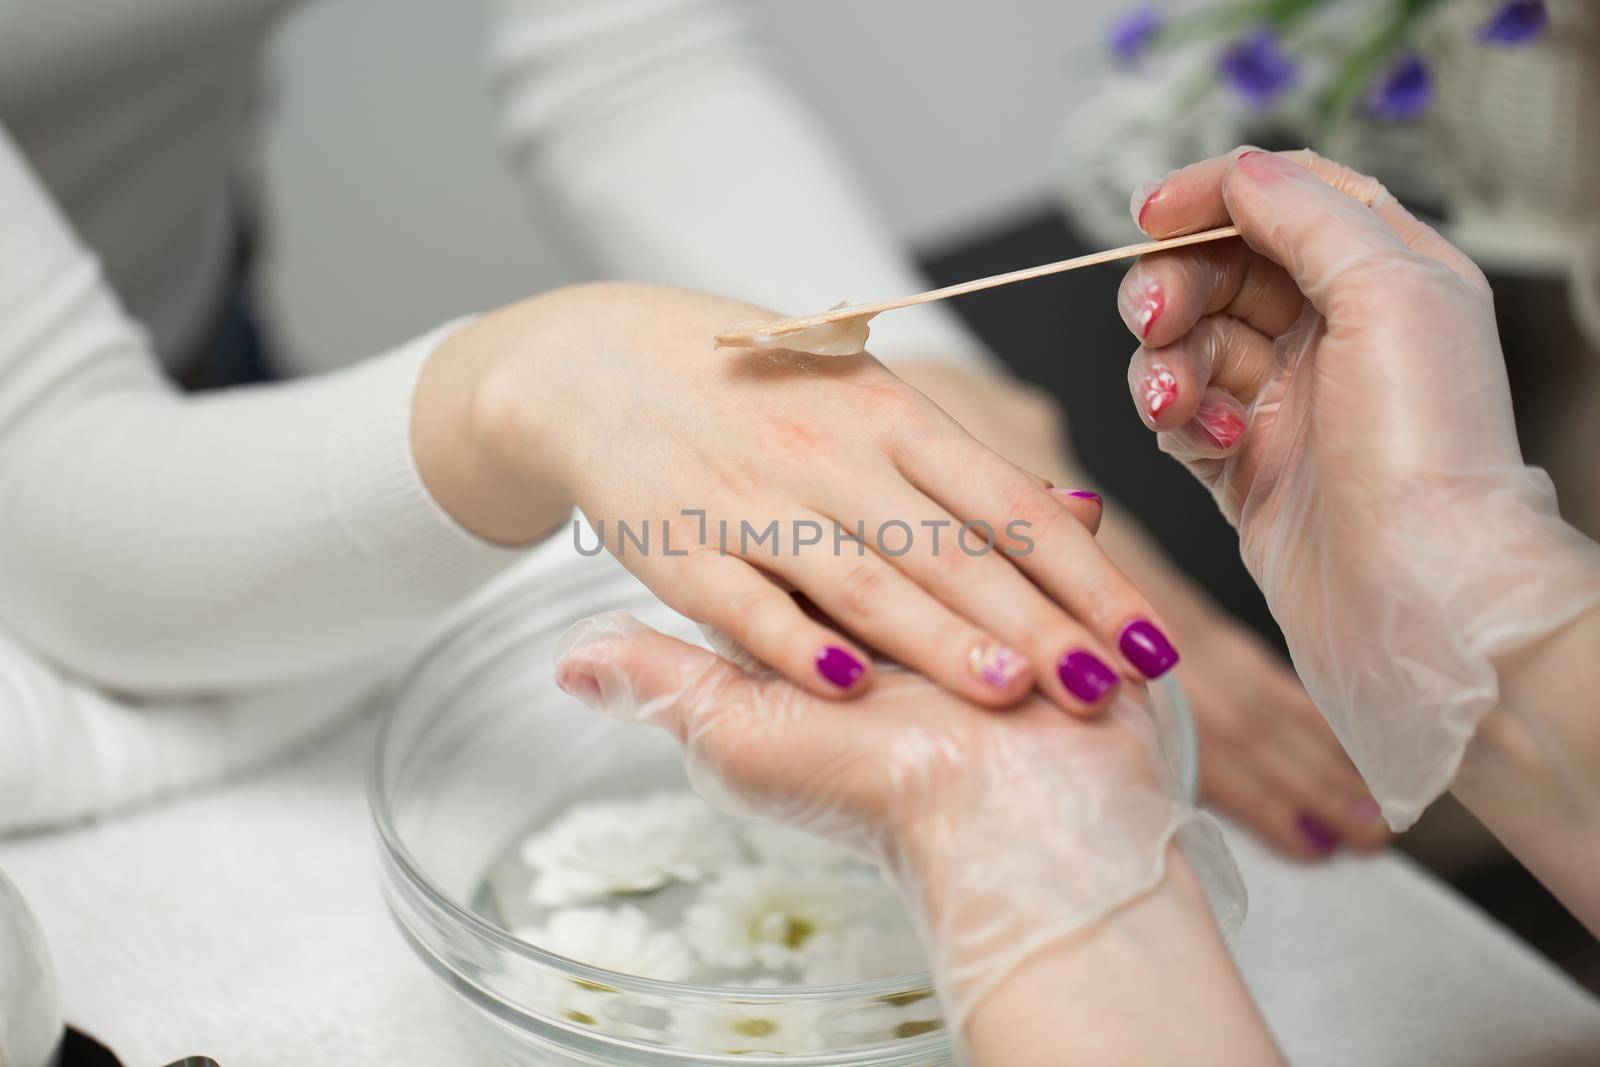 Woman in a nail salon receiving a manicure, she is bathing her hands in paraffin or wax. by StudioPeace